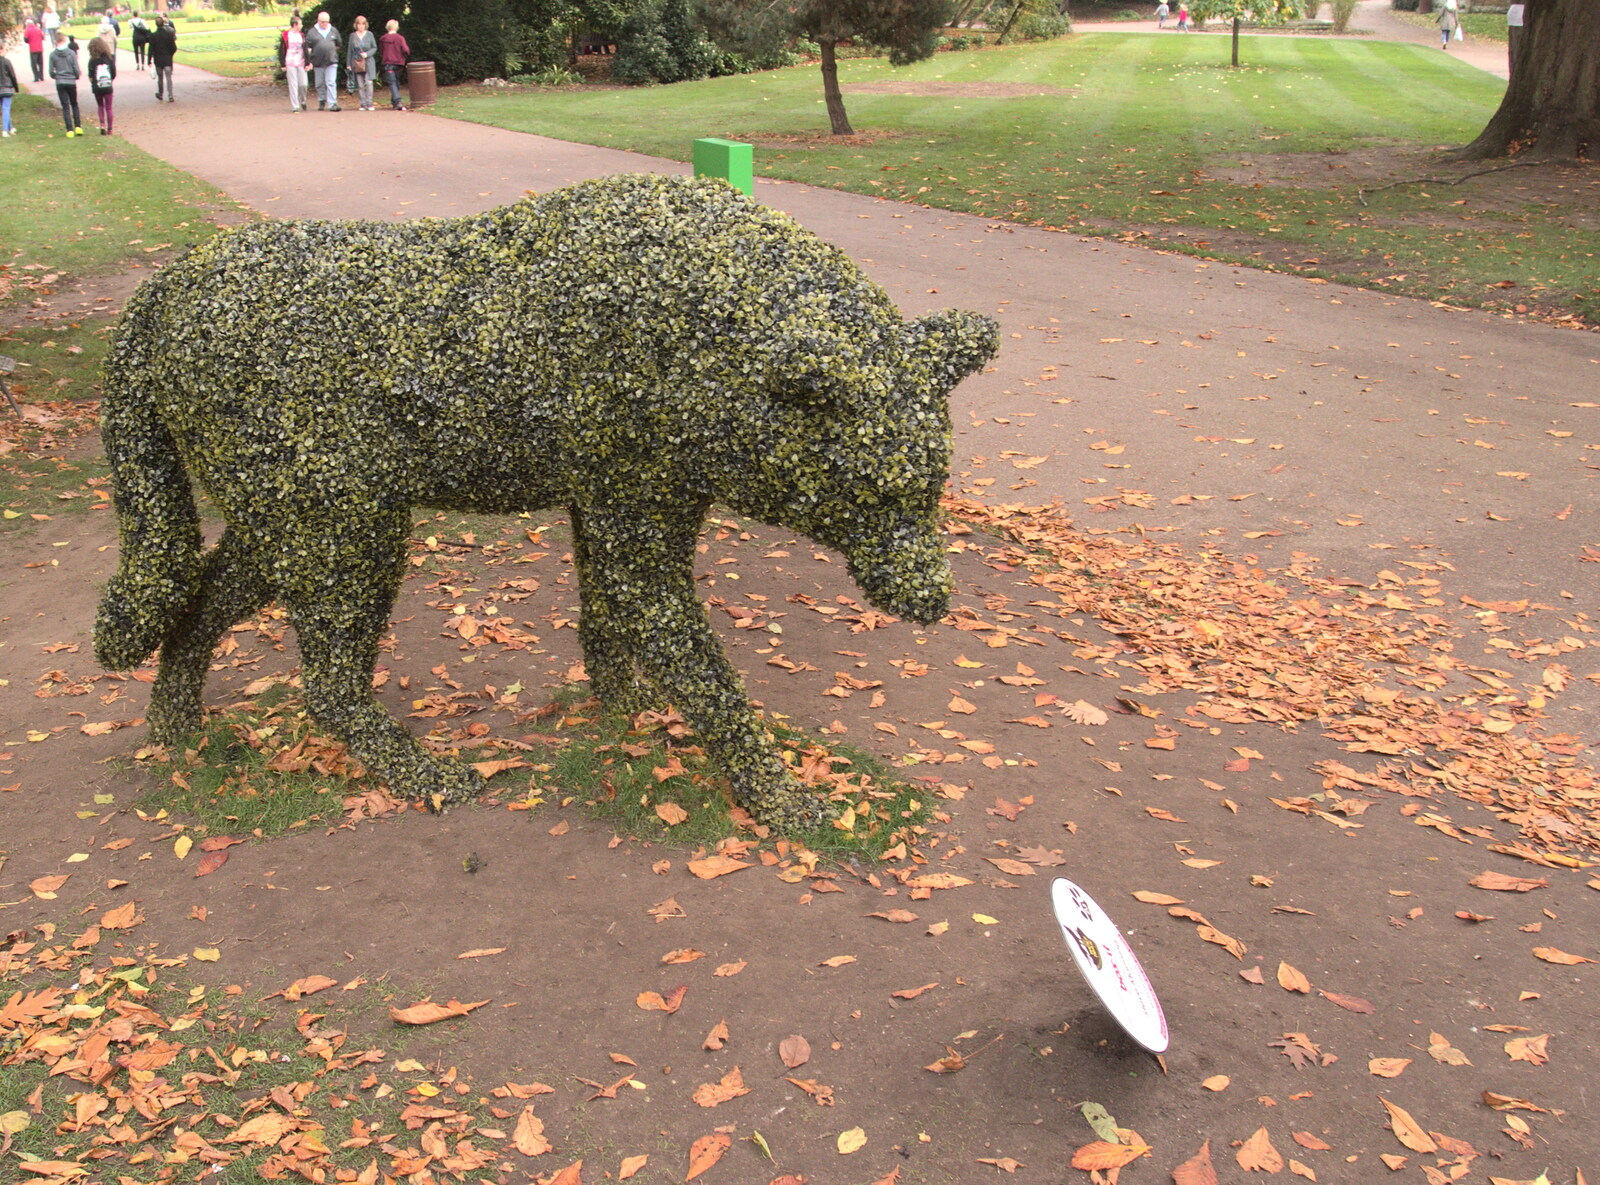 A topiary wolf from Abbey Gardens in Autumn, Bury St. Edmunds, Suffolk - 27th October 2015